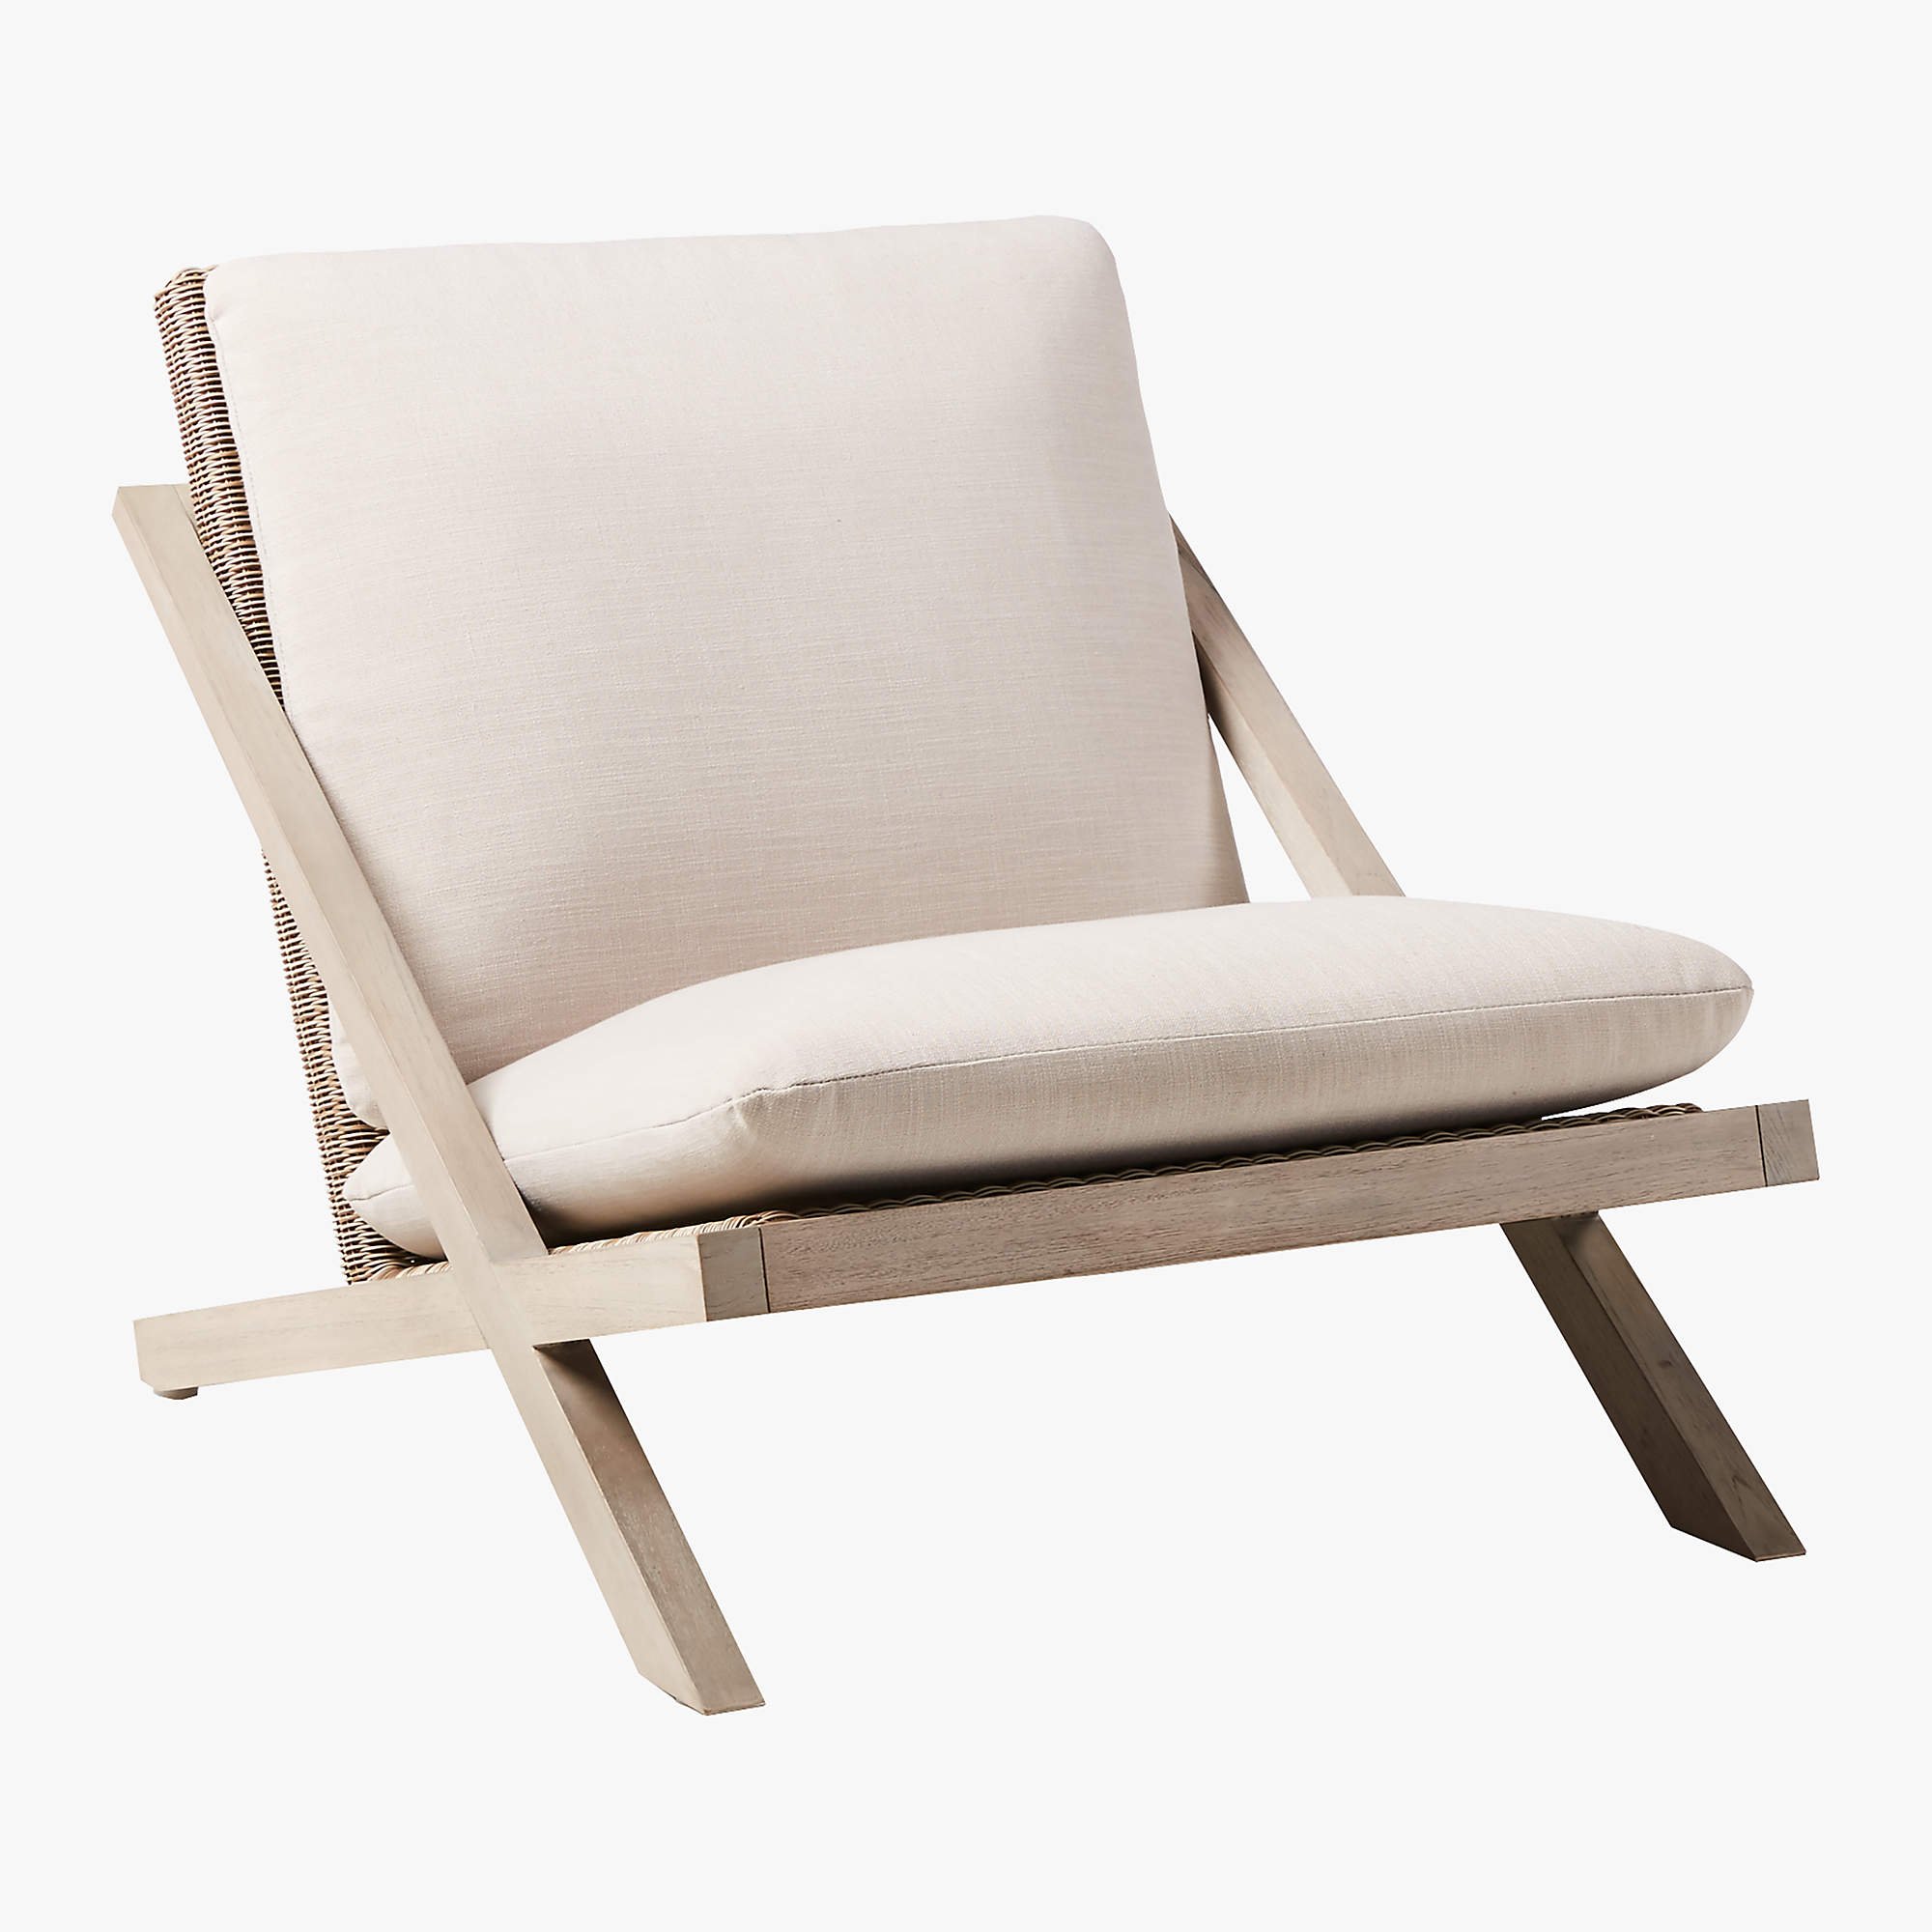 Lecco teak outdoor chair with sand colored cushions is low to the ground and laid back